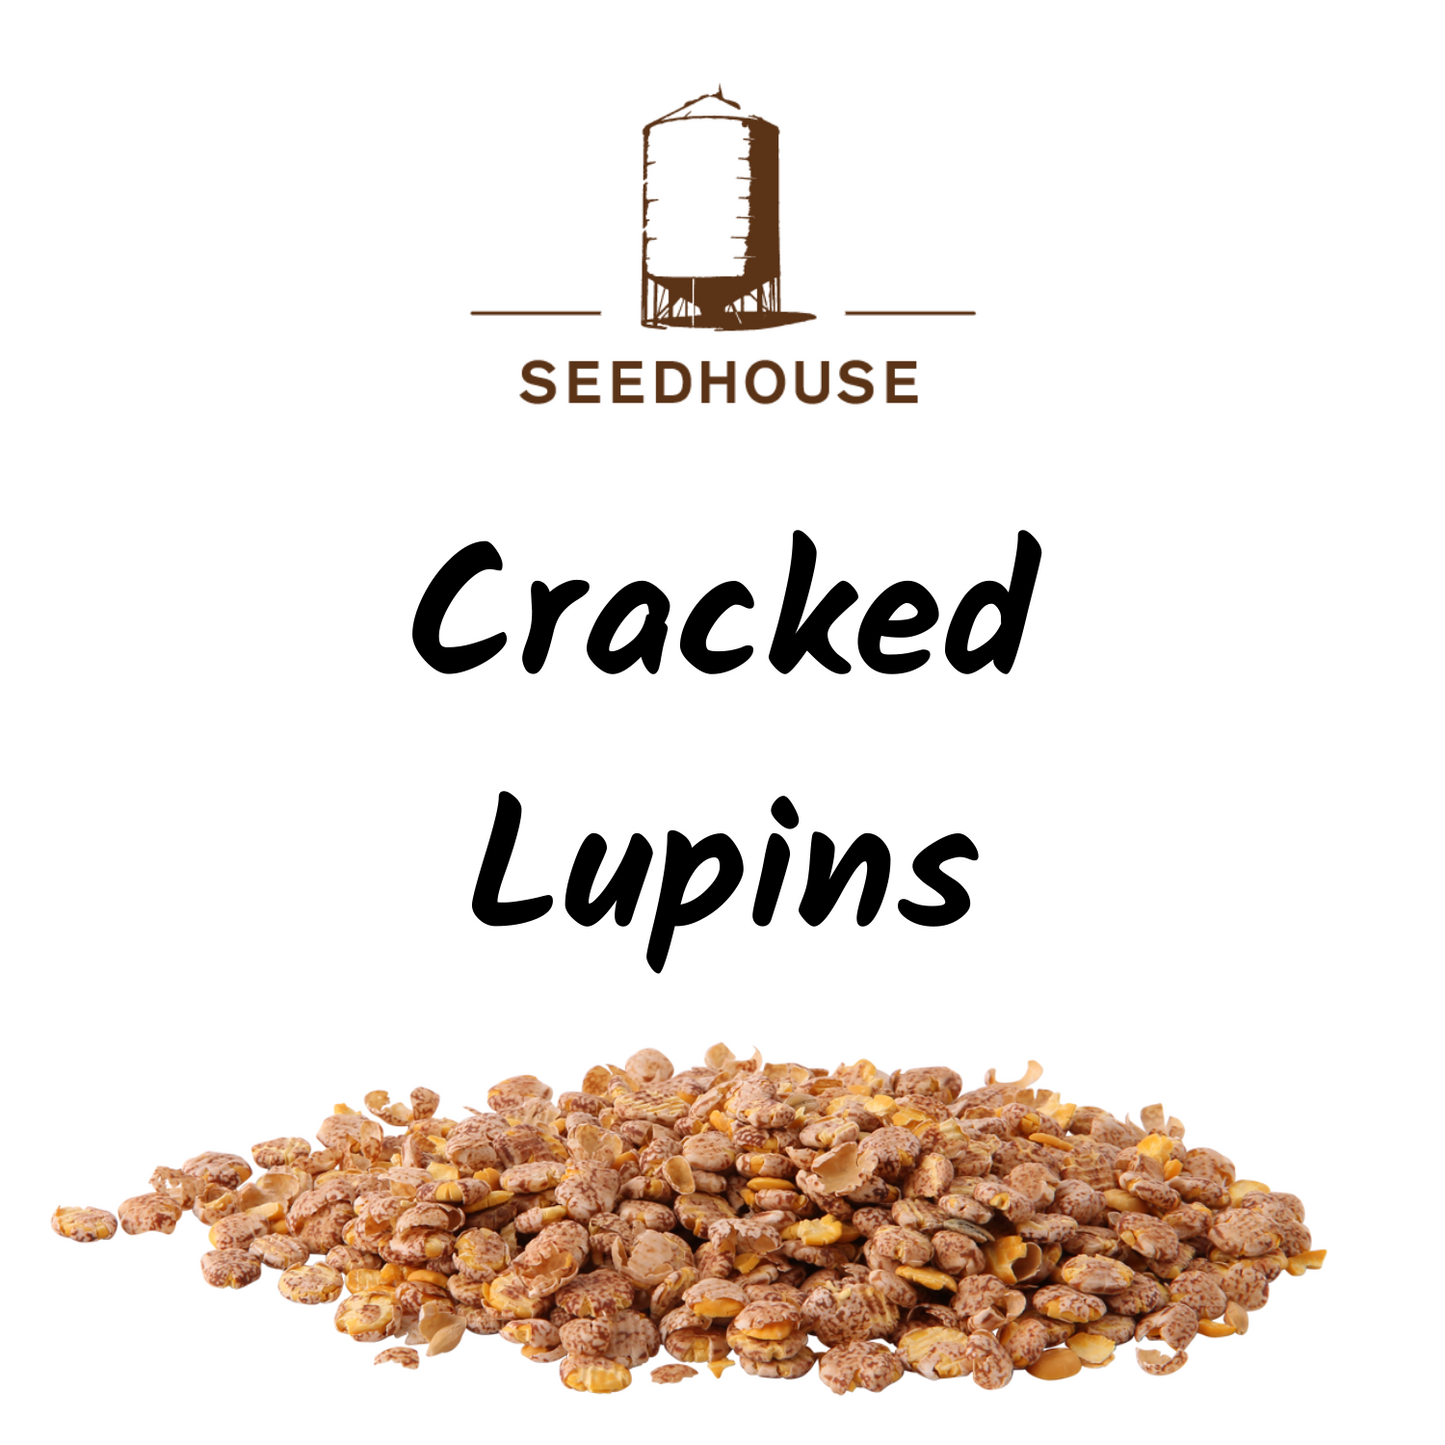 Seedhouse Cracked Lupins 20kg